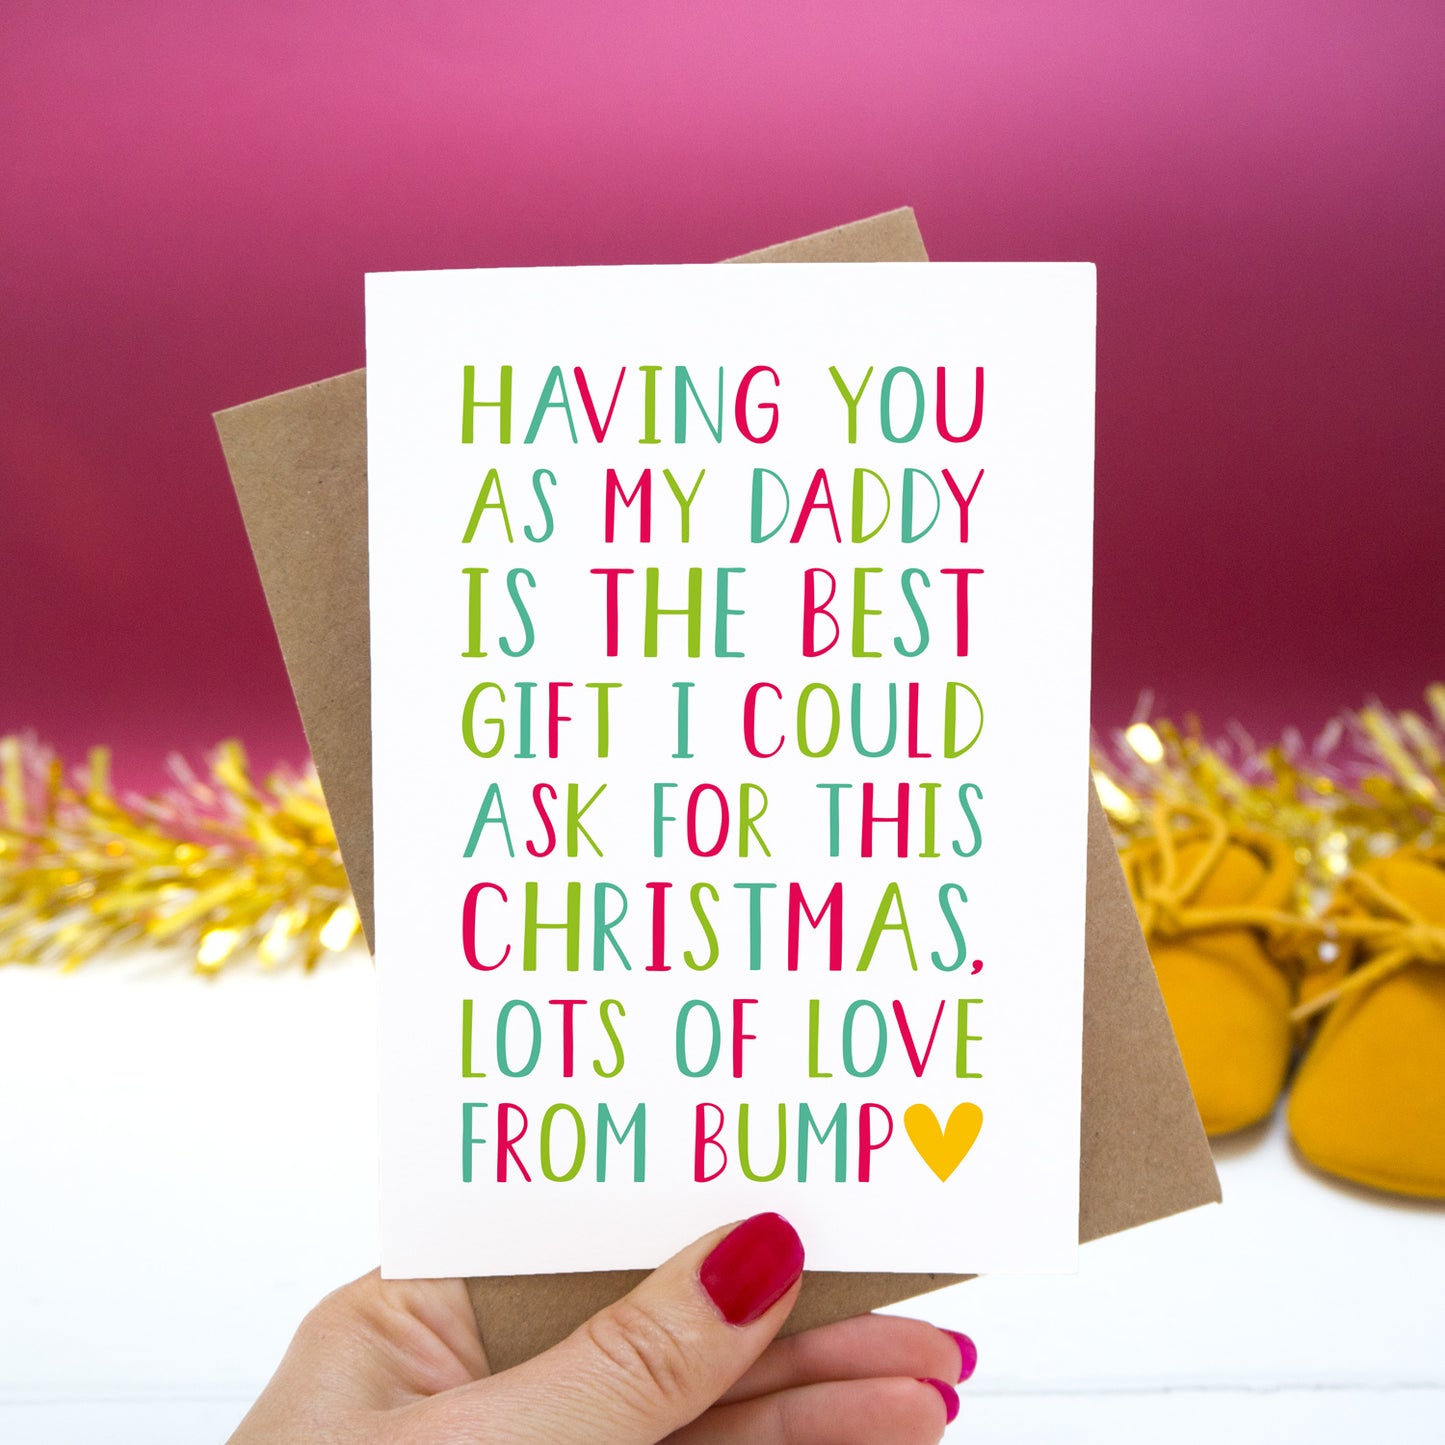 Having you as my Daddy is the best gift I could ask for this Christmas, lots of love from bump." - Christmas bump card with red and green text set on a red background with gold tinsel and mustard shoes.